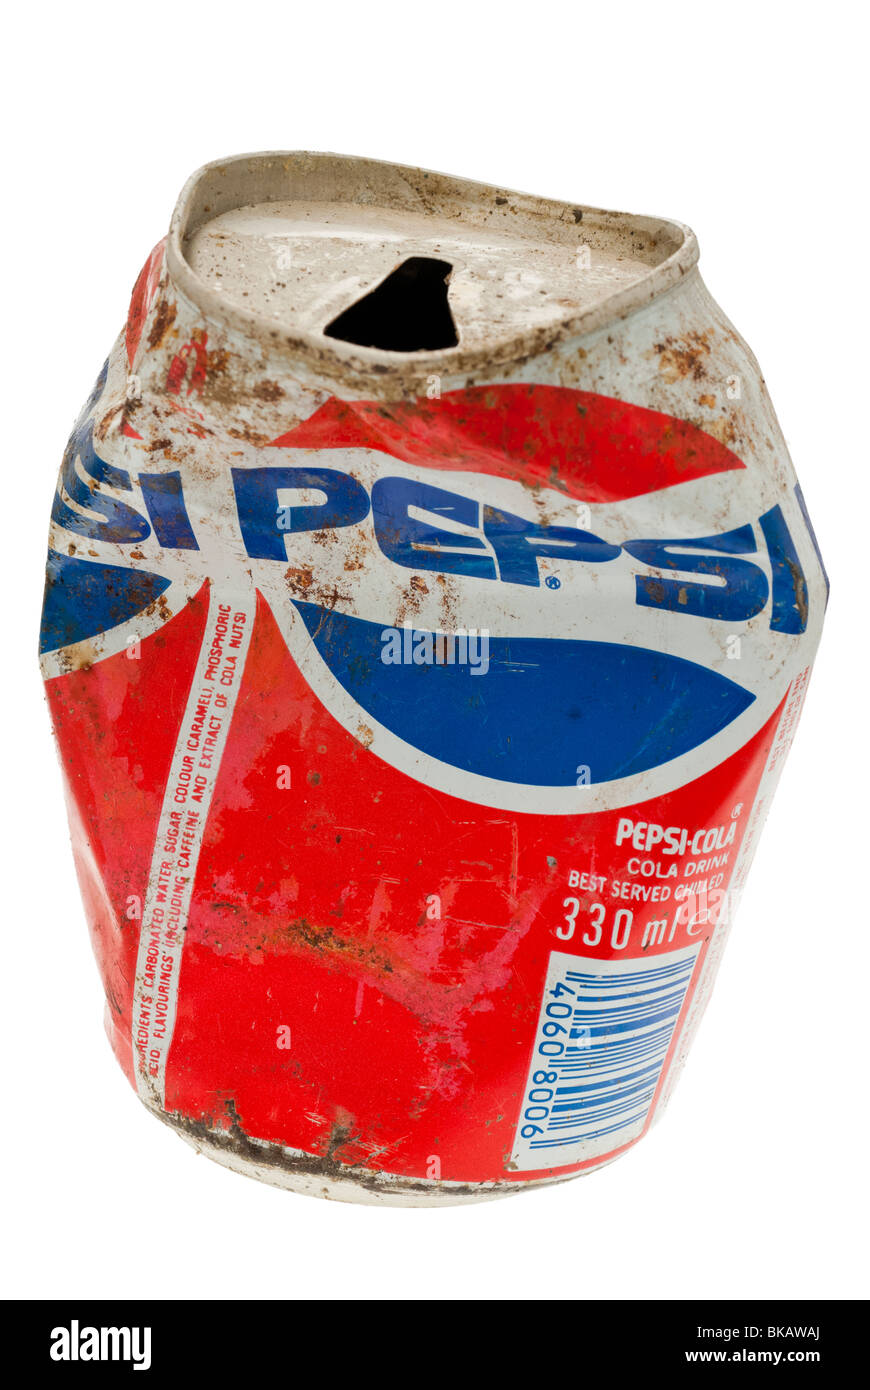 Old Can of Pepsi Cola Stock Photo